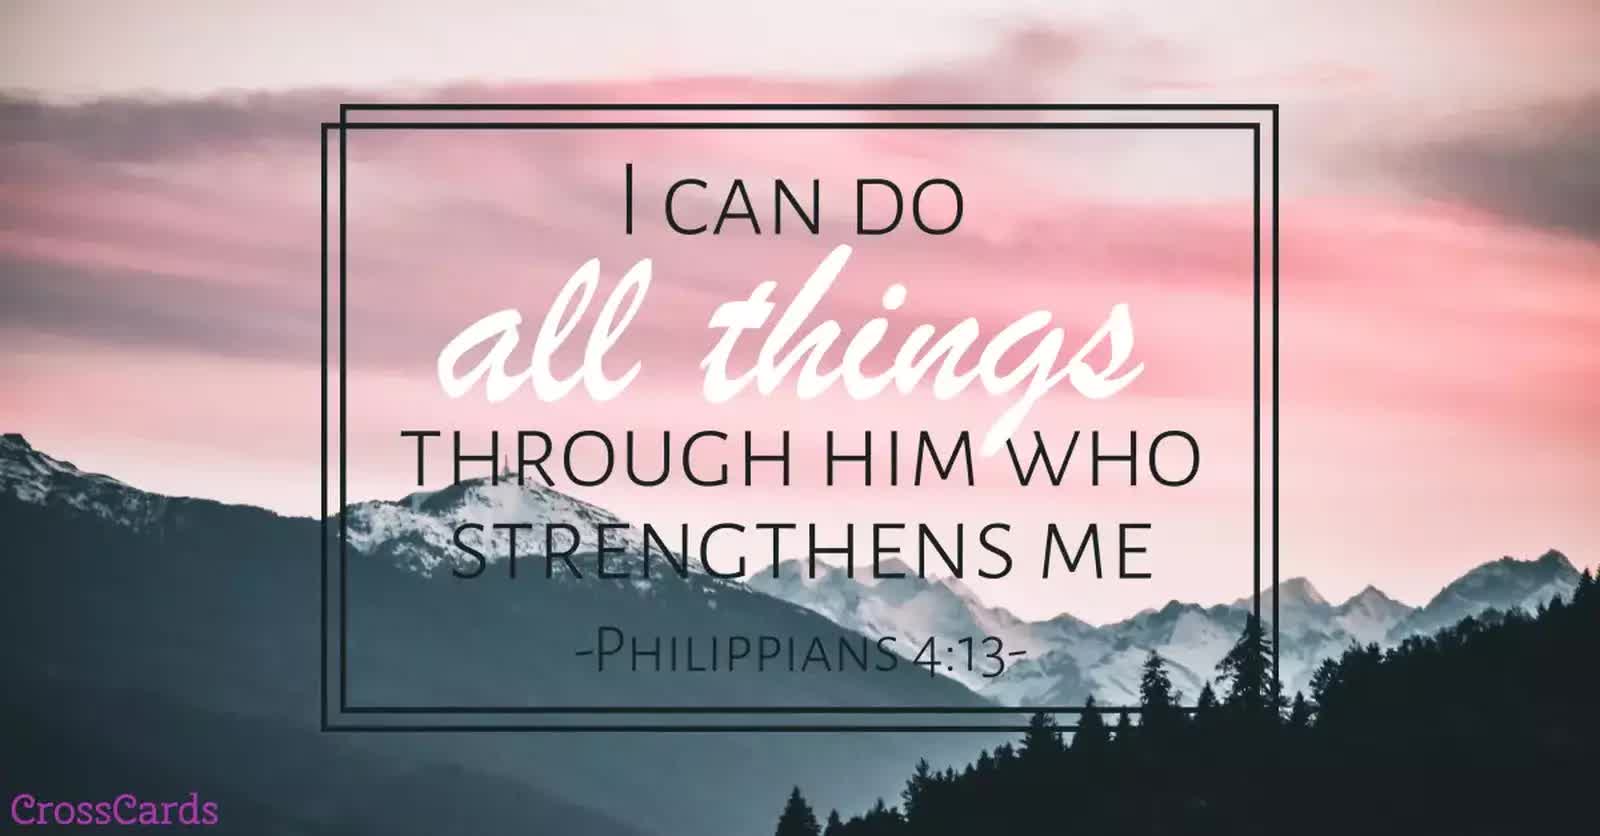 i can do all things - encouraging bible verses